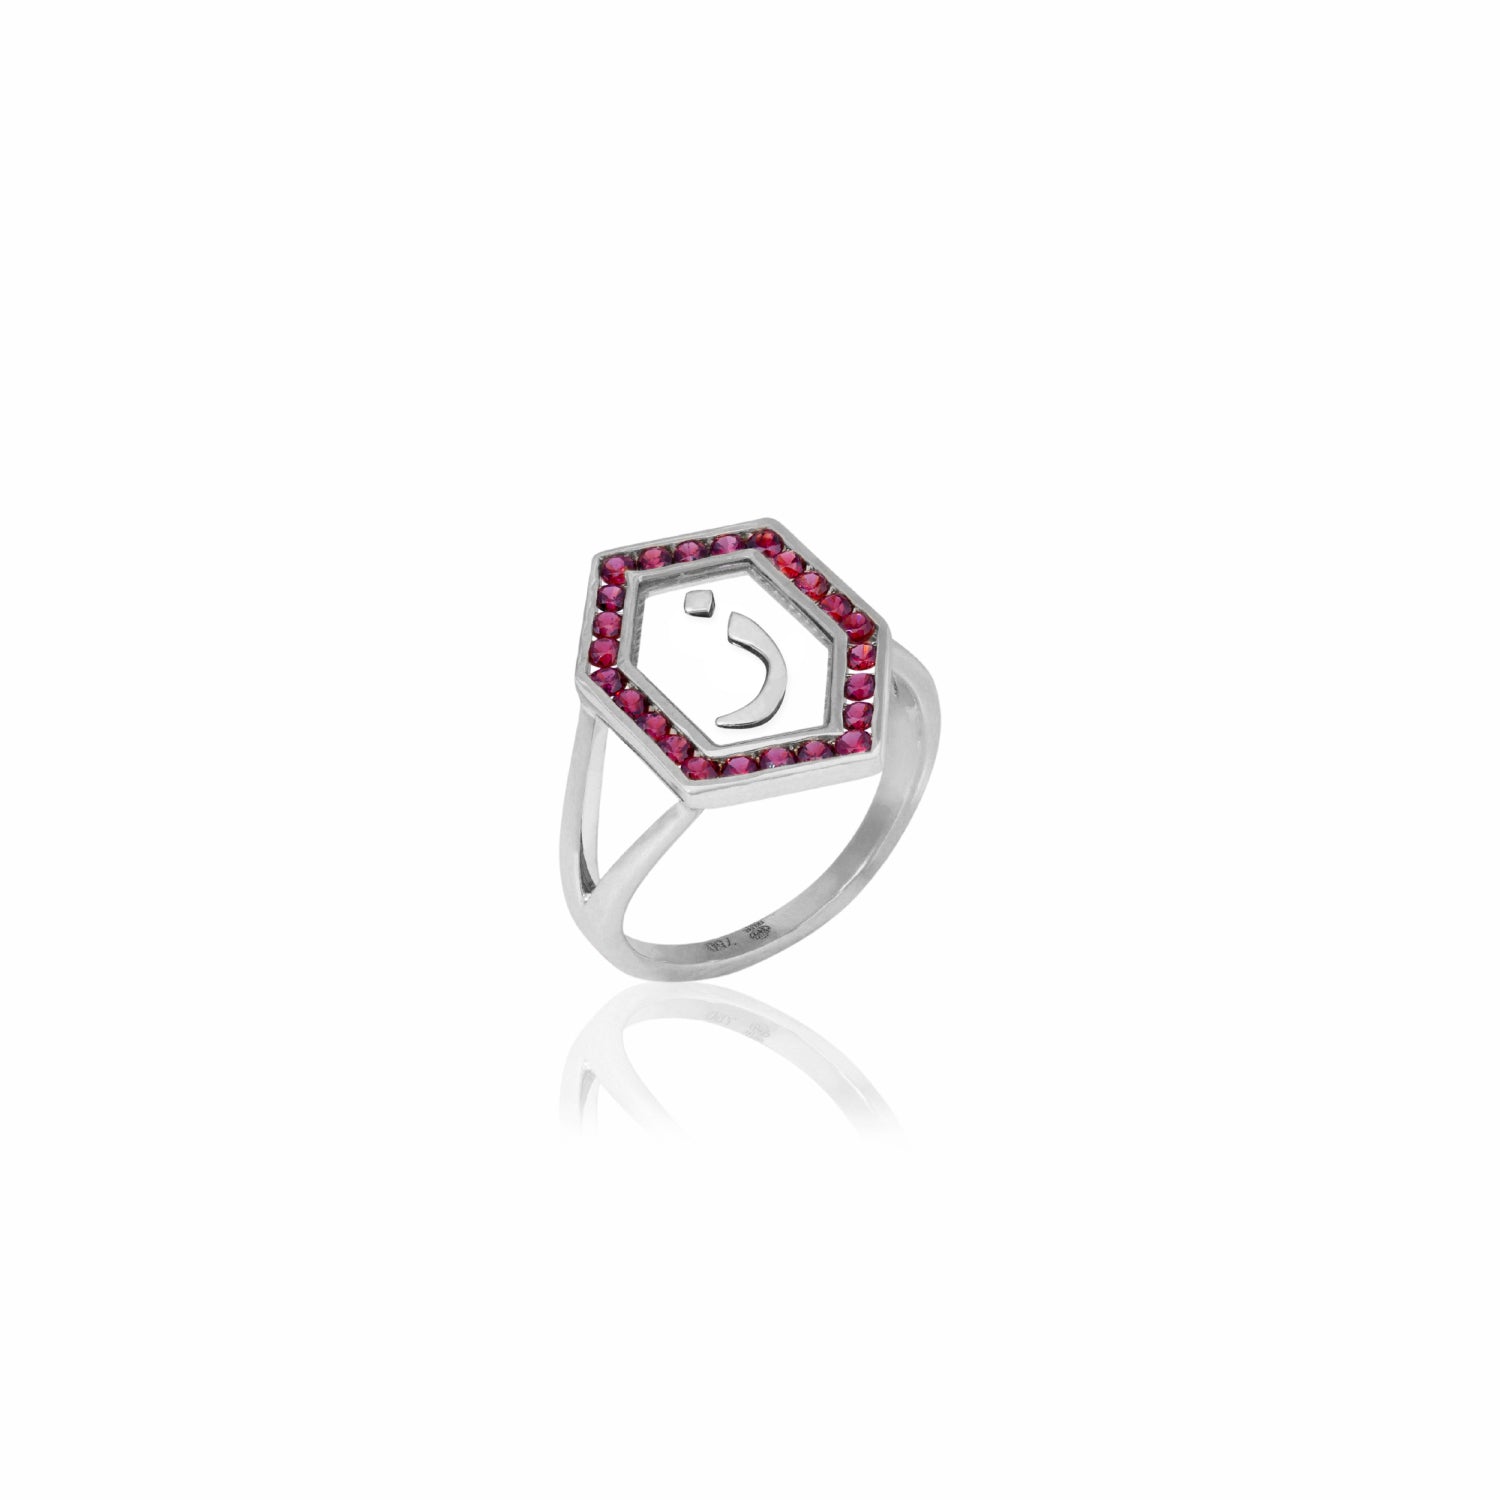 Qamoos 1.0 Letter ز Ruby Ring in White Gold